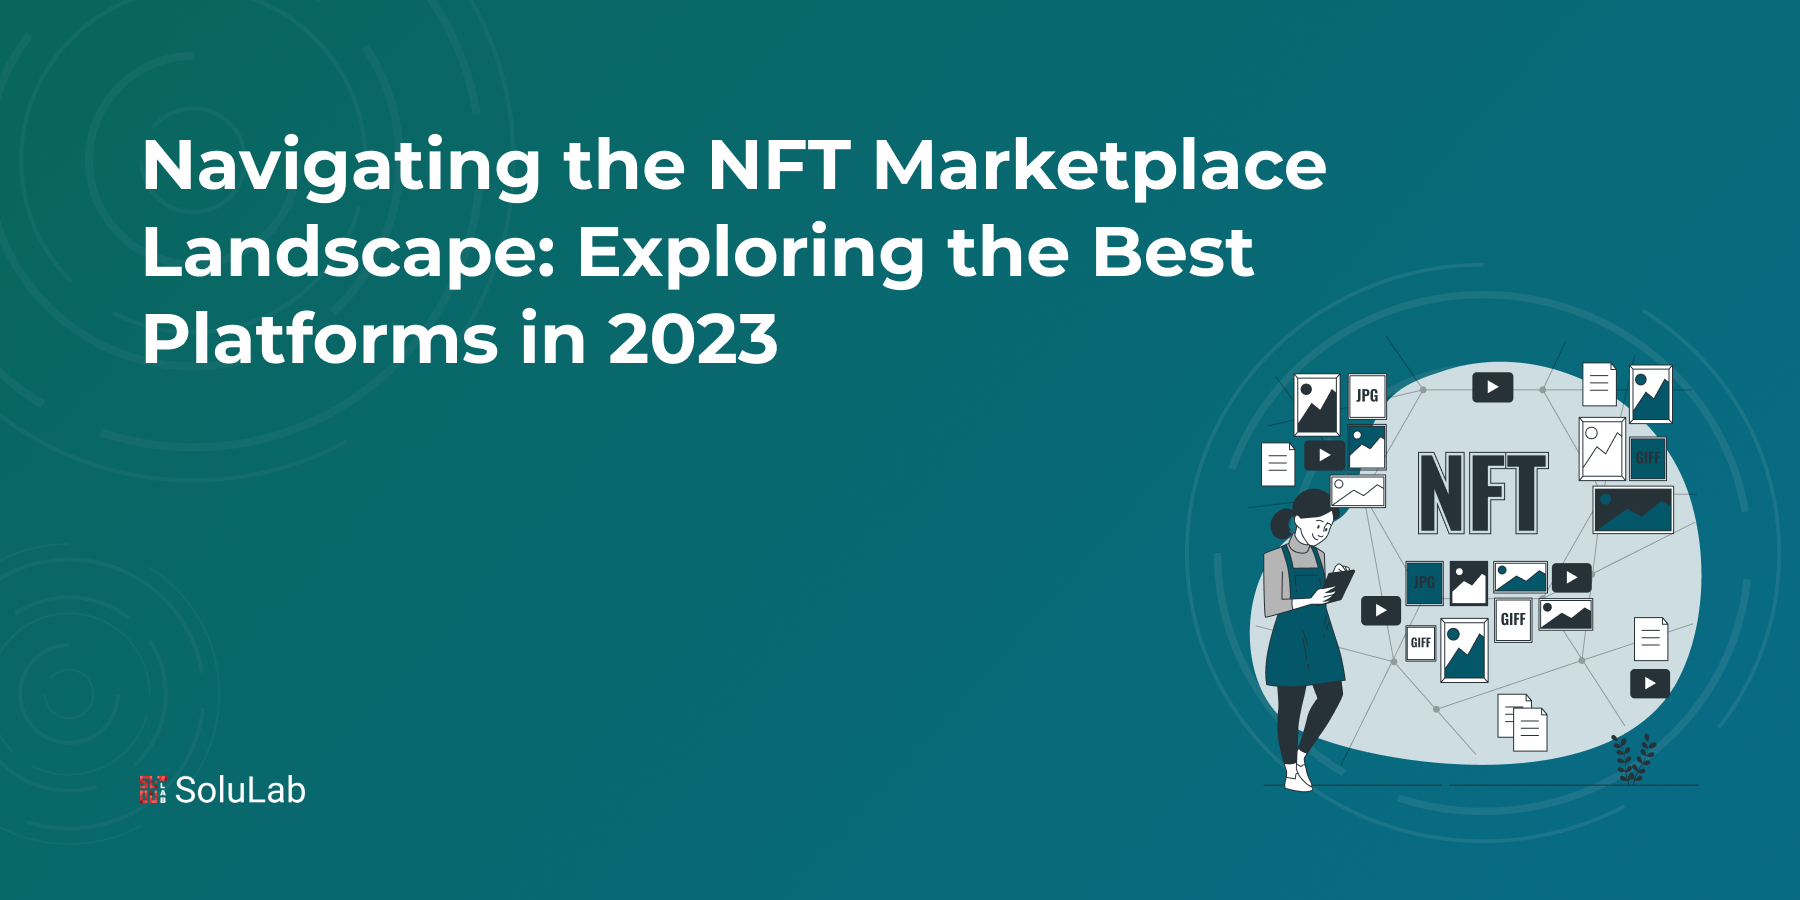 Top 25 Best NFT Marketplaces to Buy & Sell NFTs for 2023